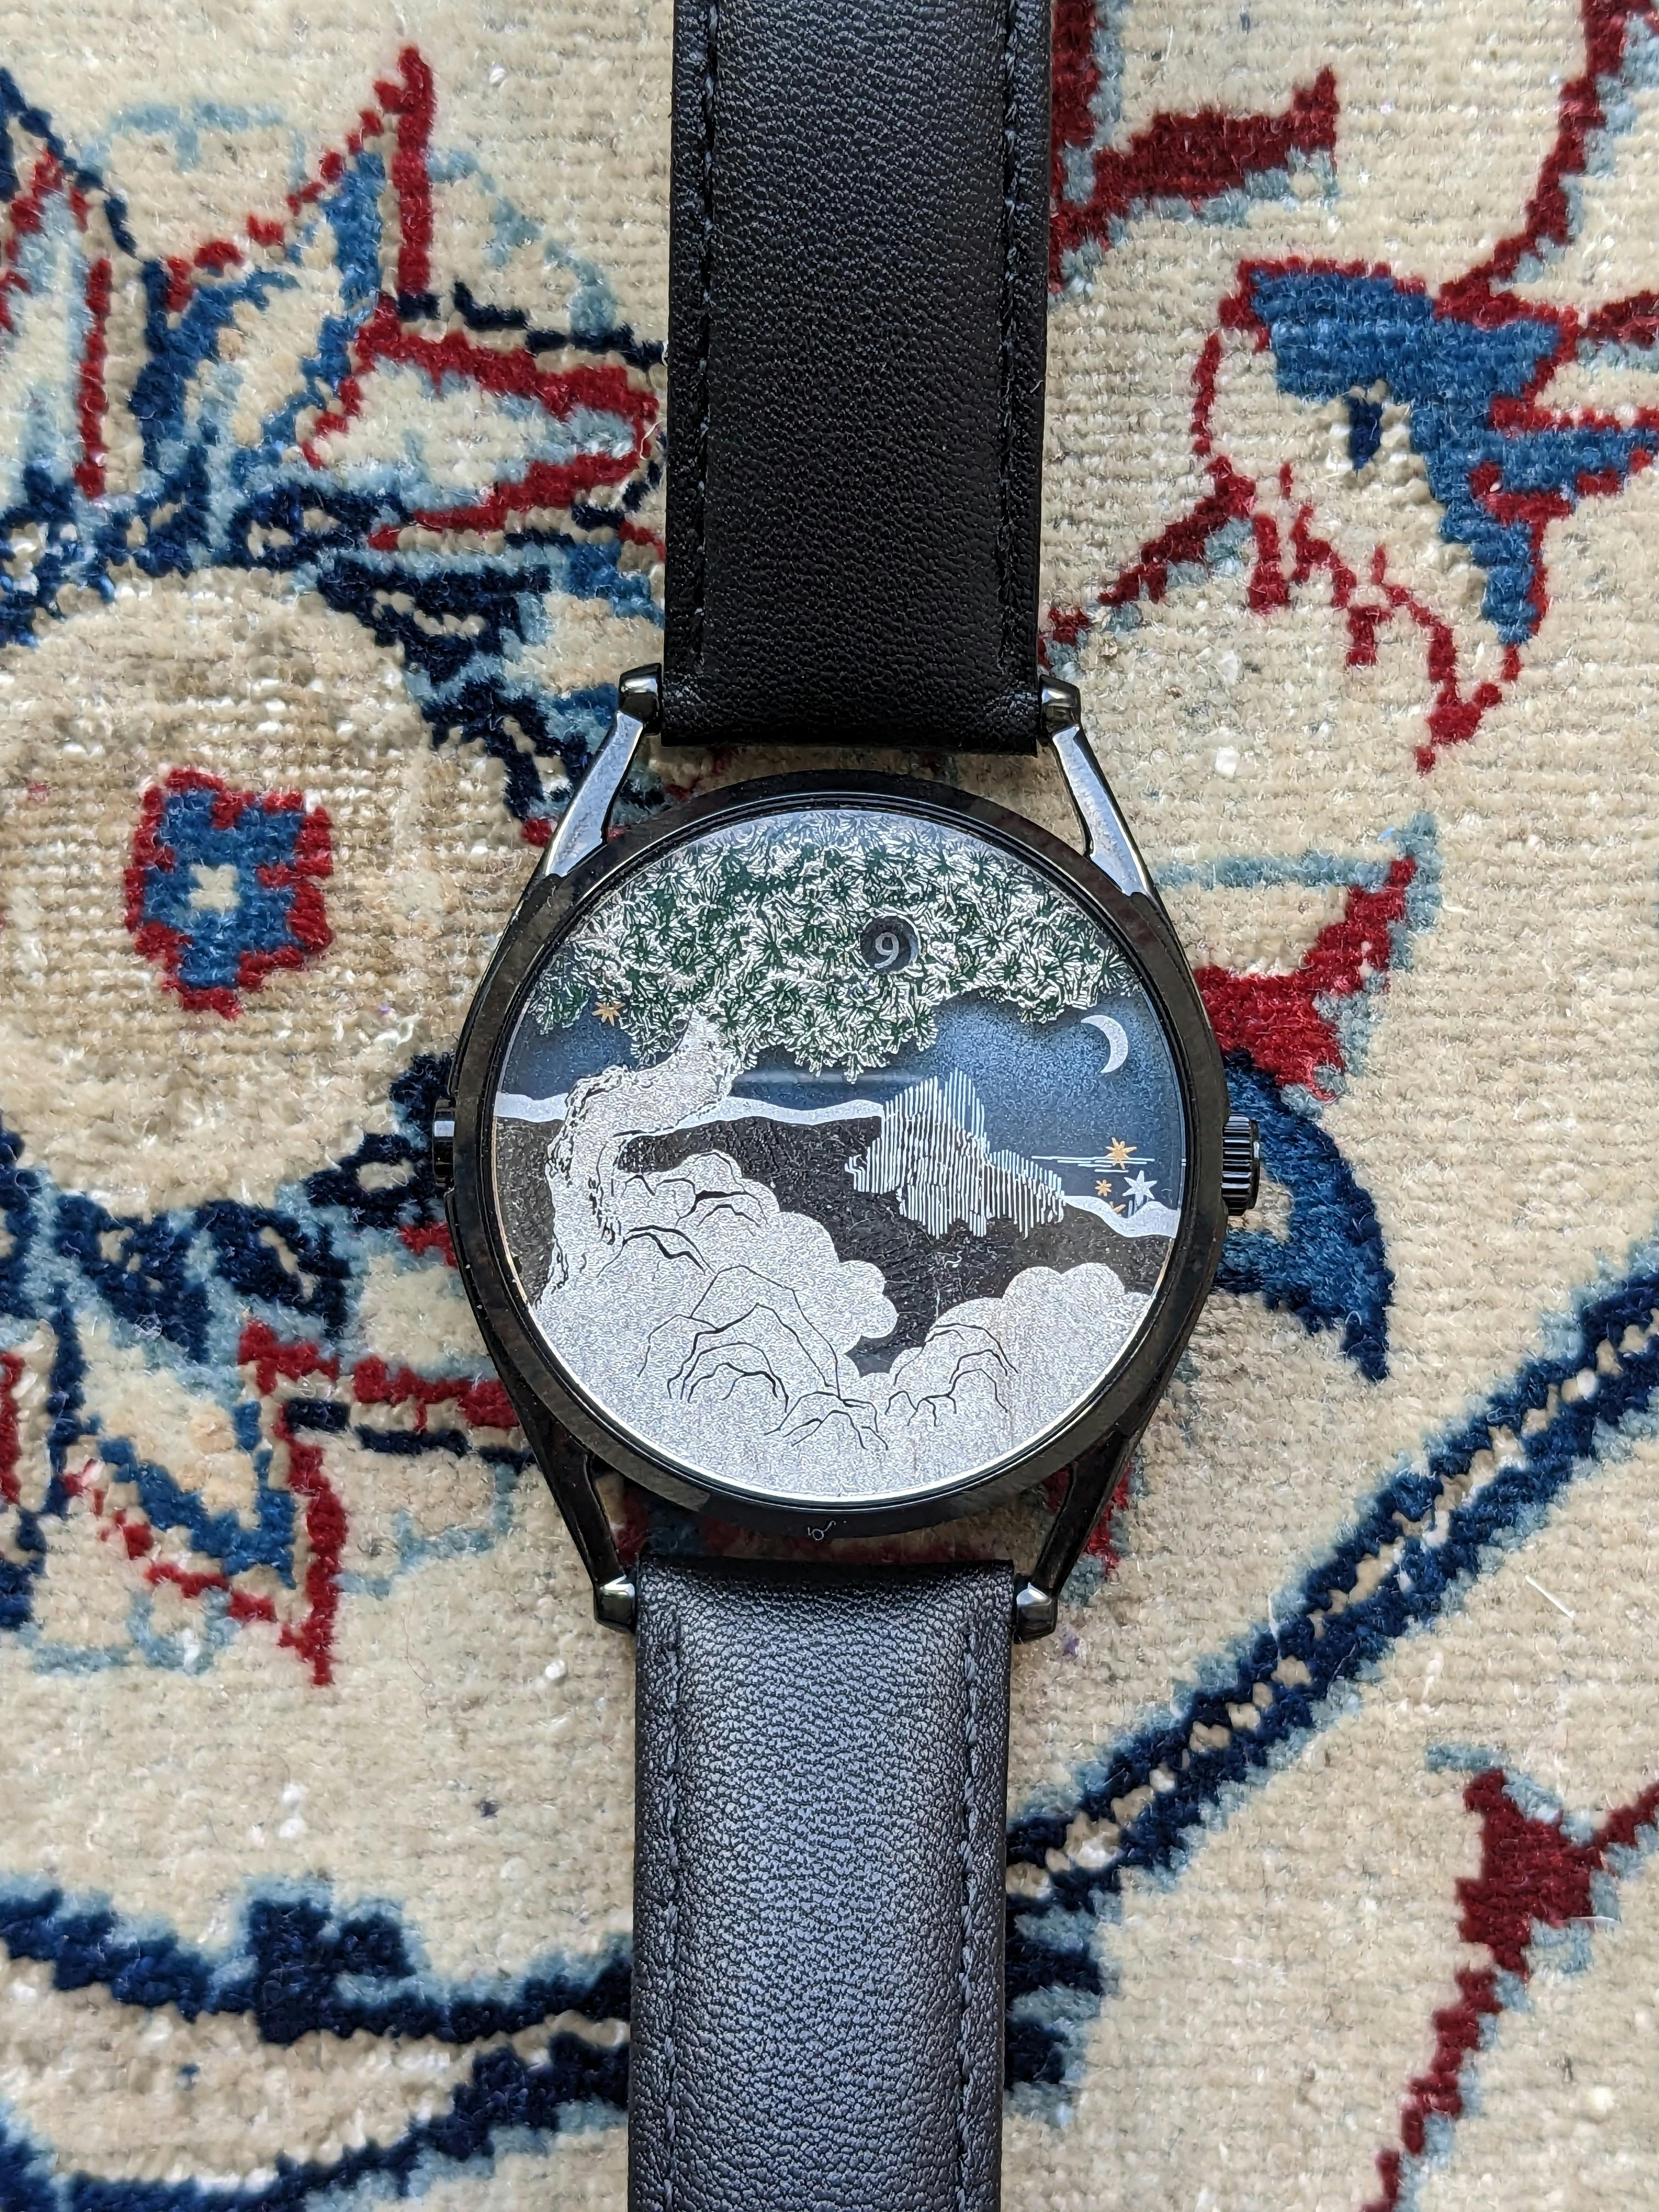 The Ascendant watch from Mr. Jones Watches. The jump hour is in a small window in the tree branch, and the minutes are read depending on the number of stars passing the 3 O'Clock position. This design is created using palladium plating on the underside of the crystal, which is highly unusual.